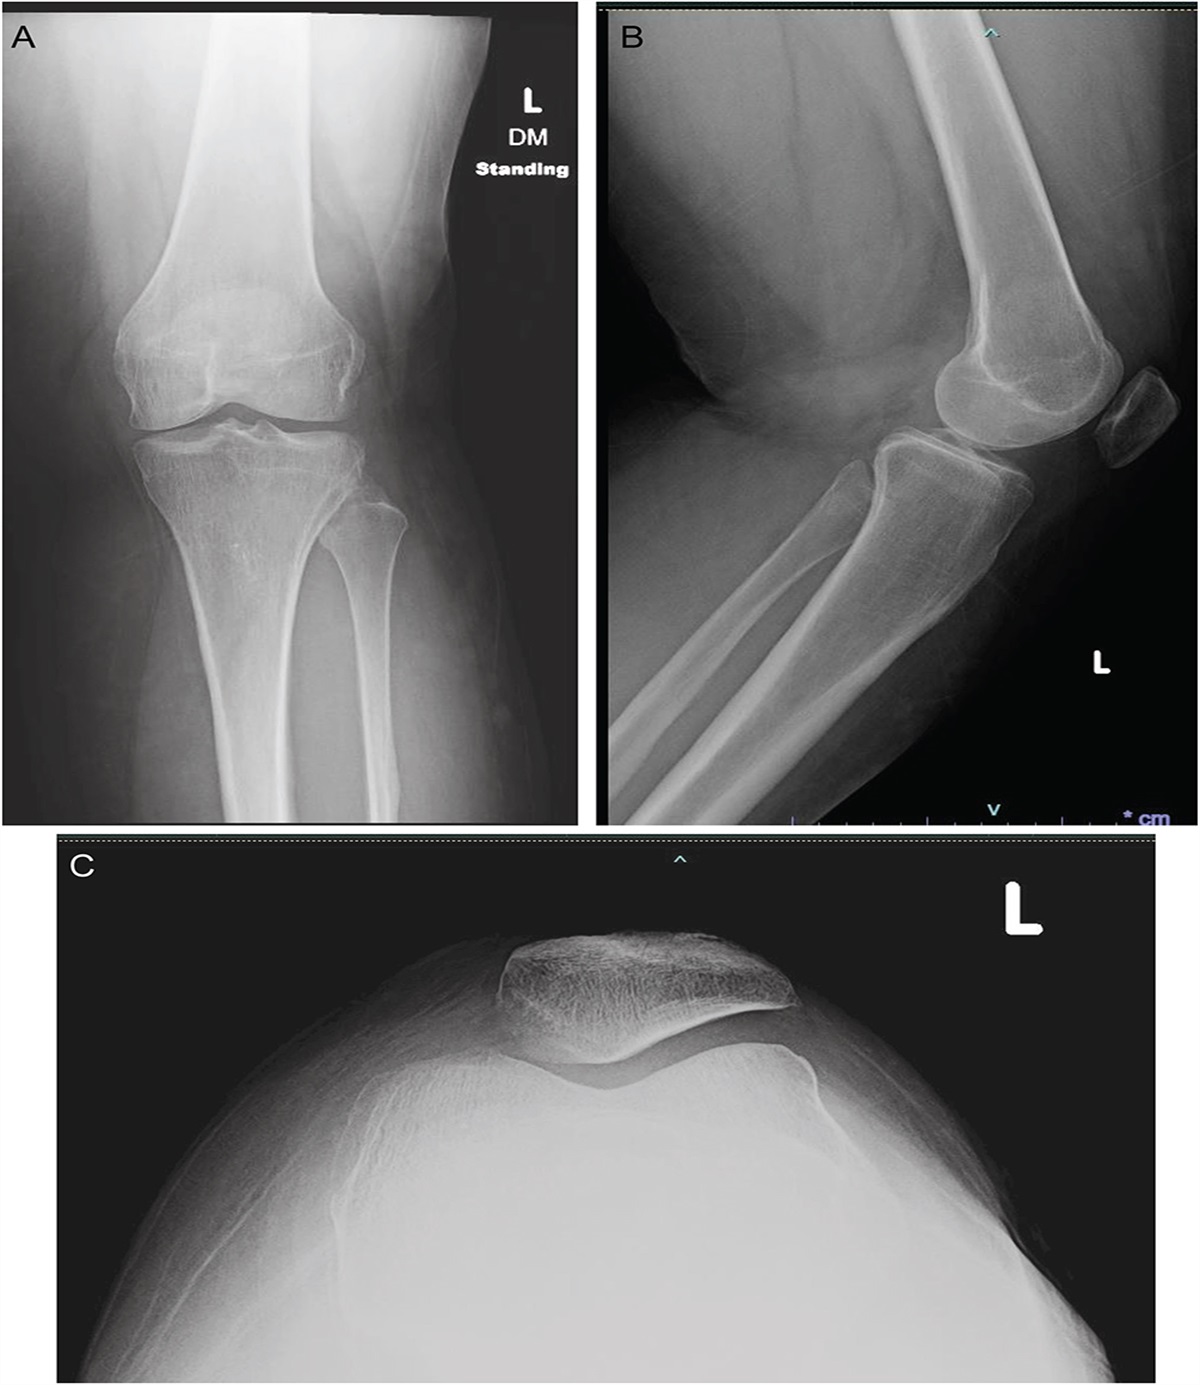 Femoral Insufficiency Fracture